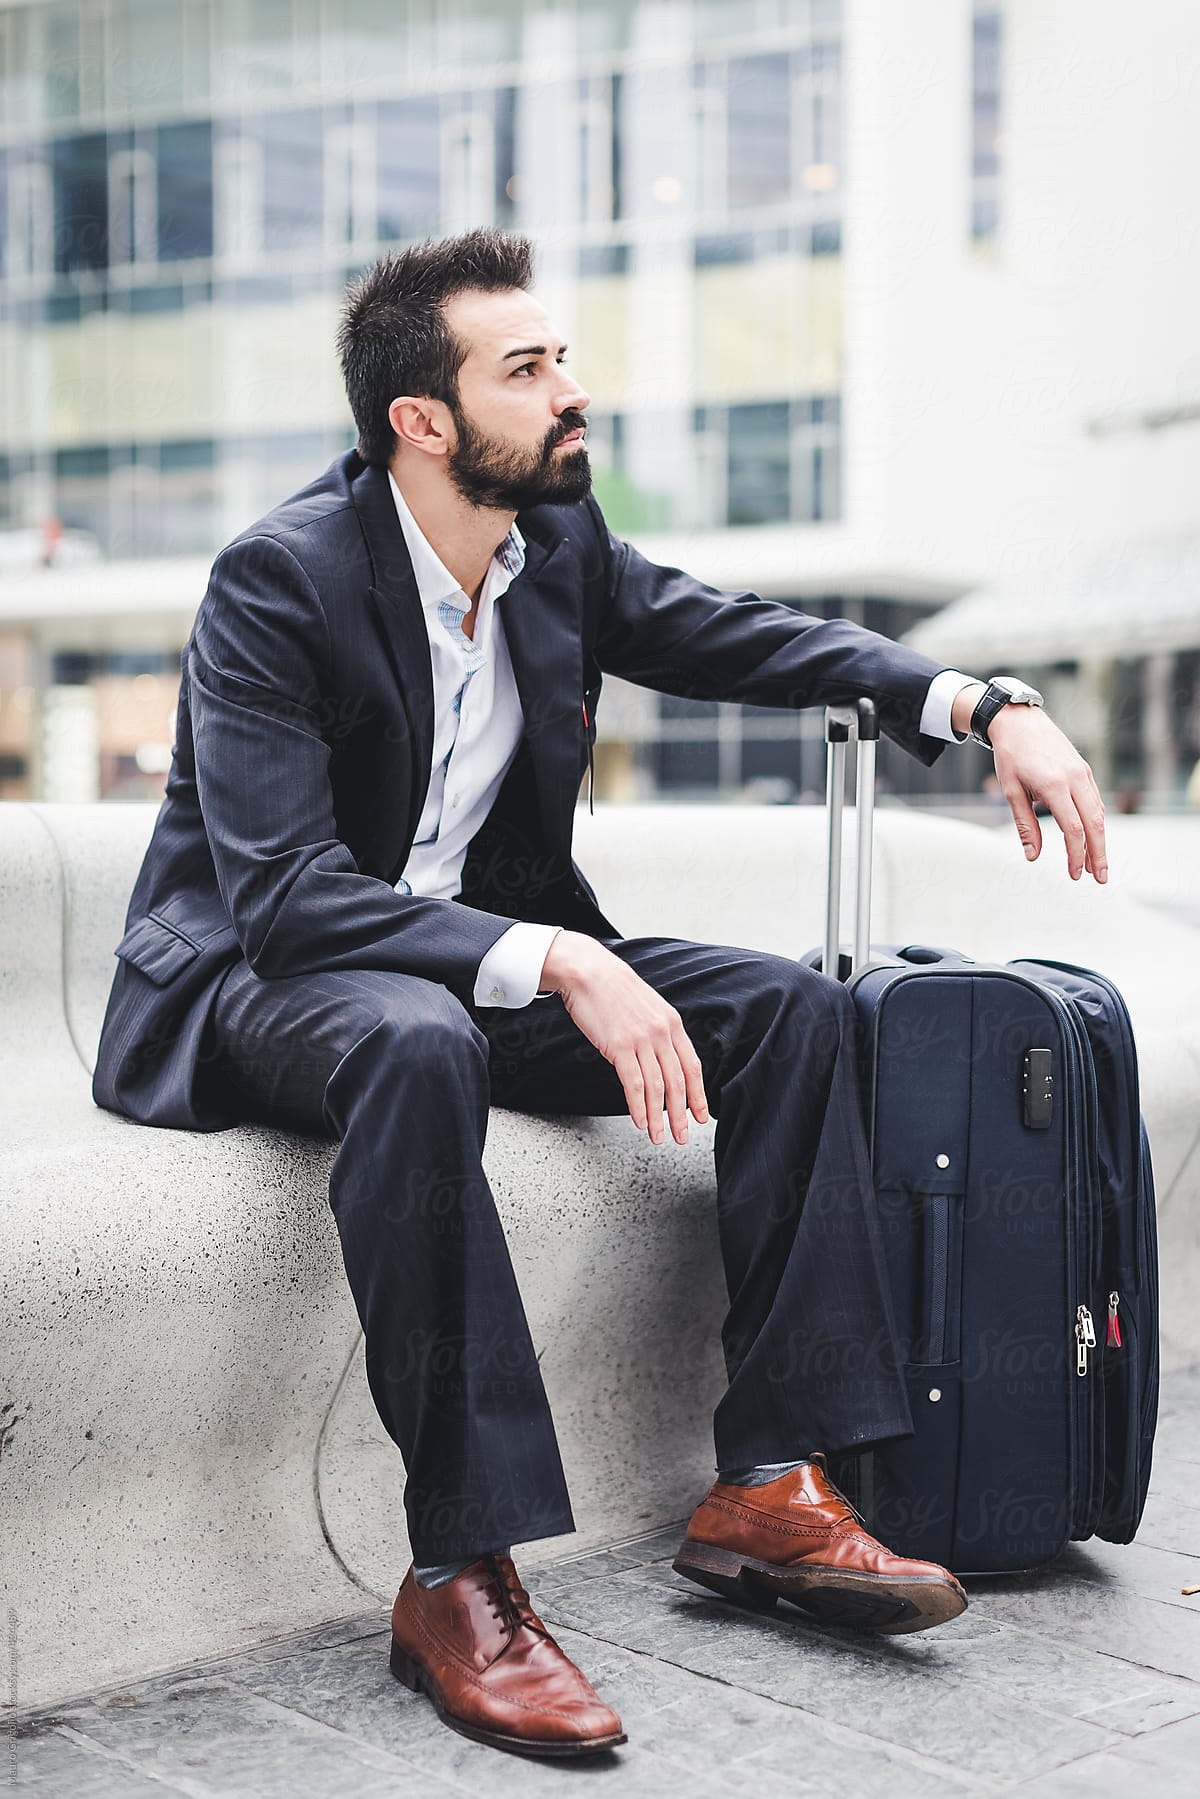 Businessman waiting for the flight